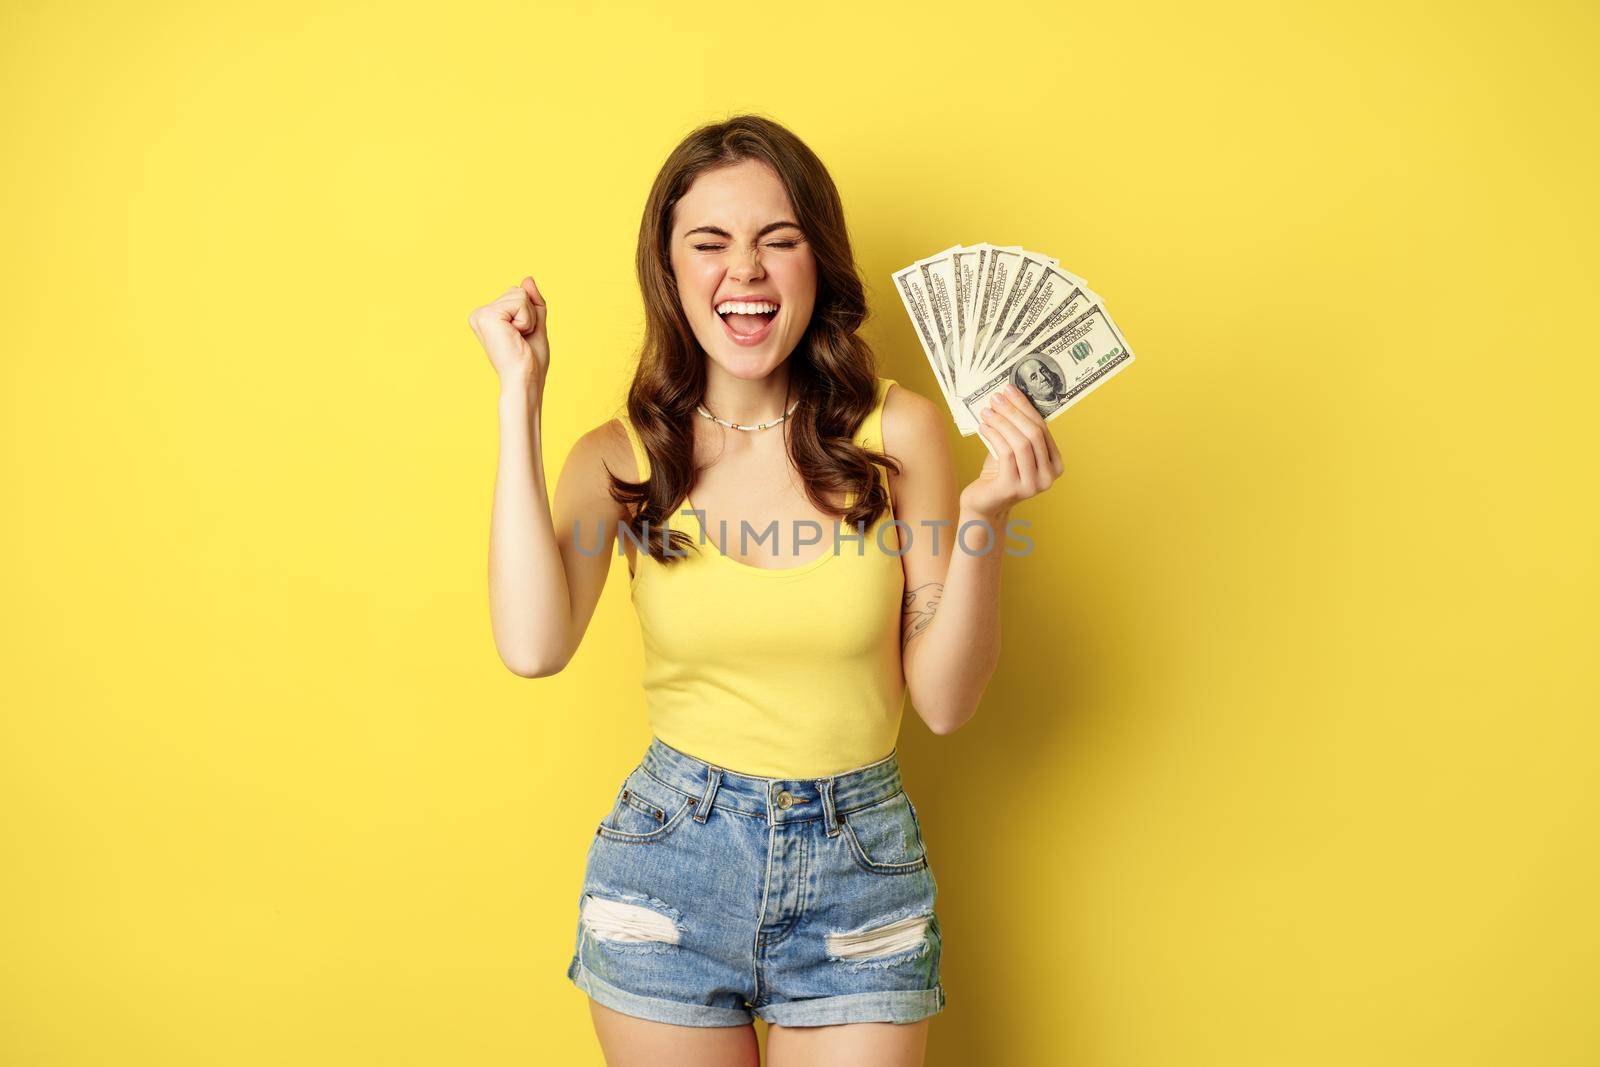 Enthusiastic smiling woman showing money cash, laughing and looking excited, standing in summer clothes against yellow background.